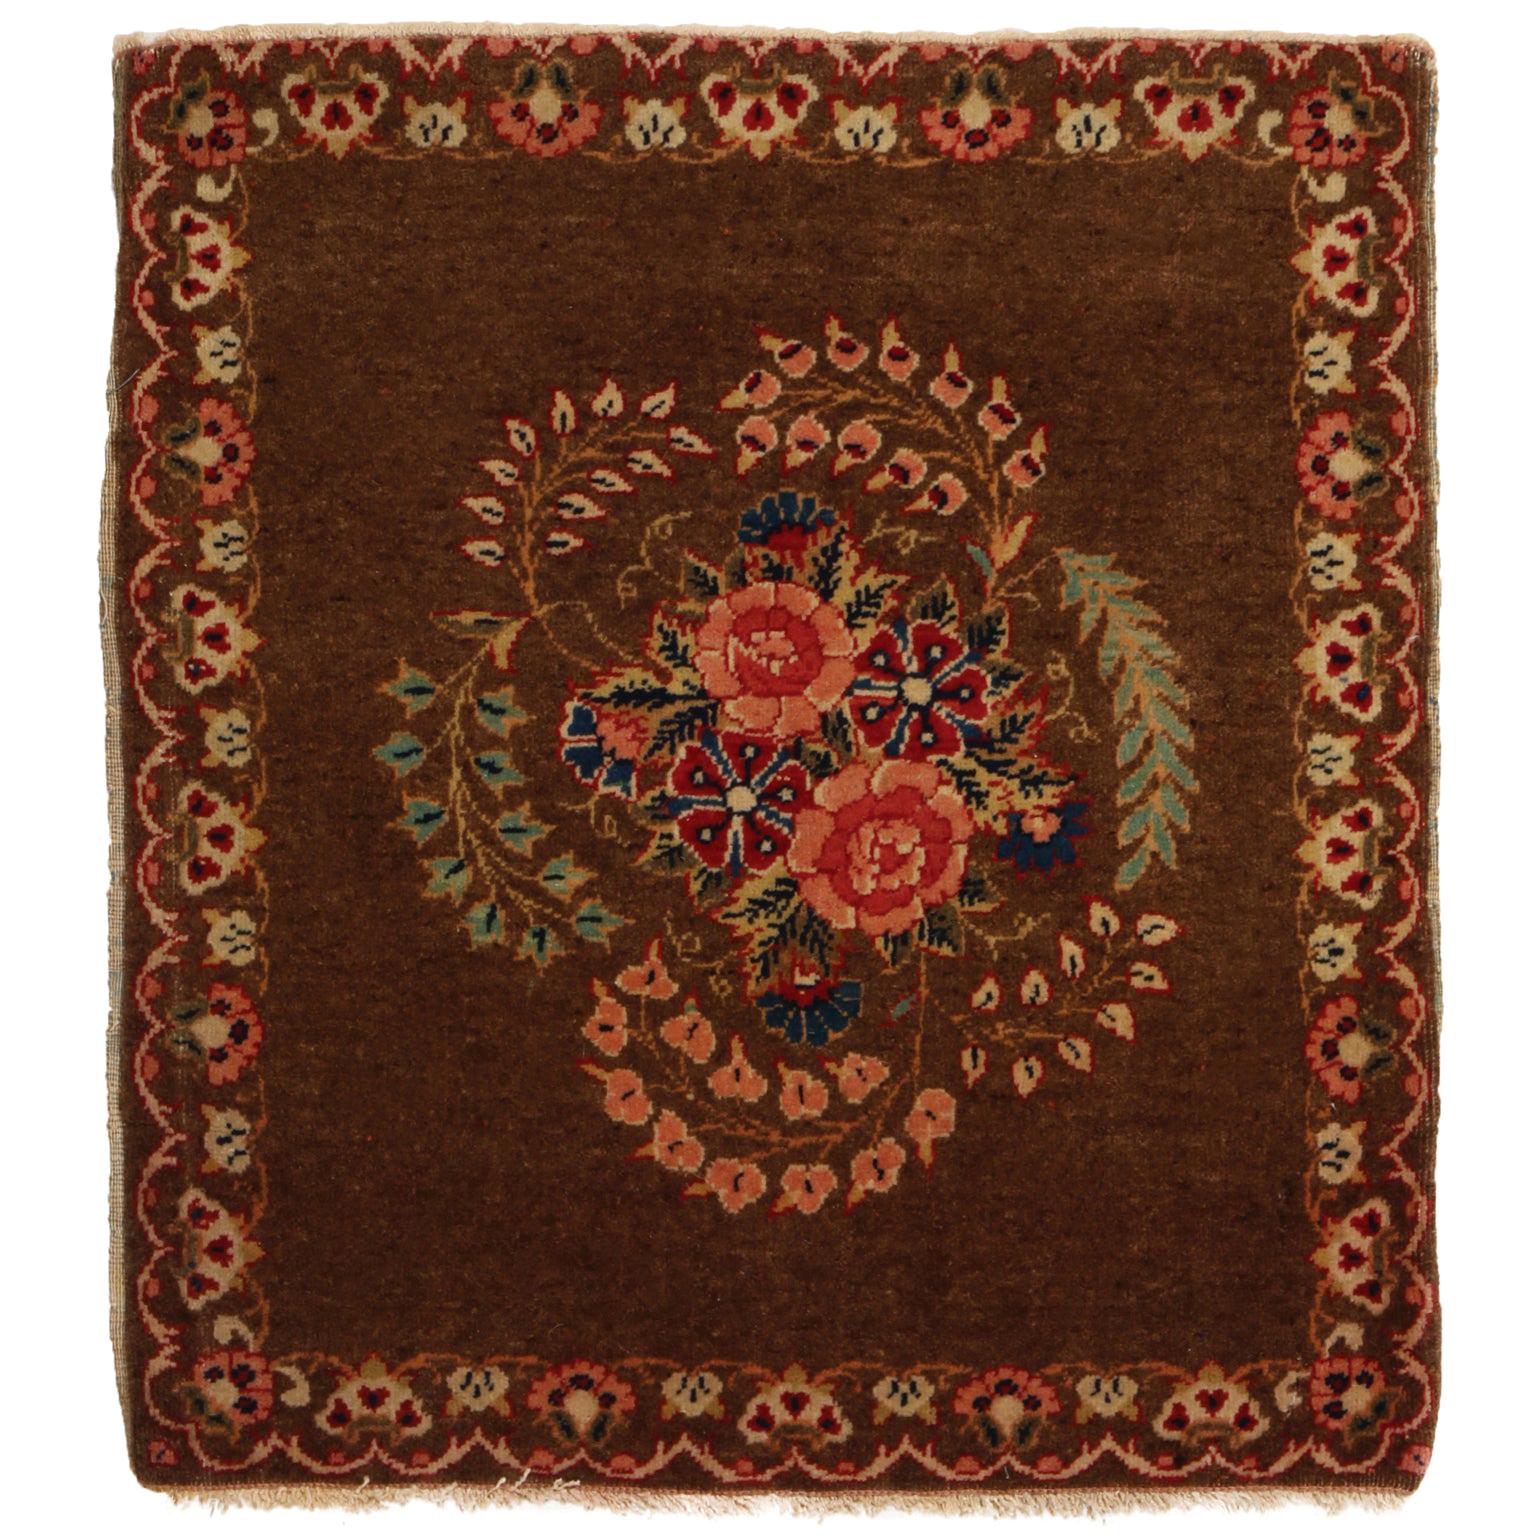 Antique Kashan Brown Wool Persian Rug with Floral Medallion